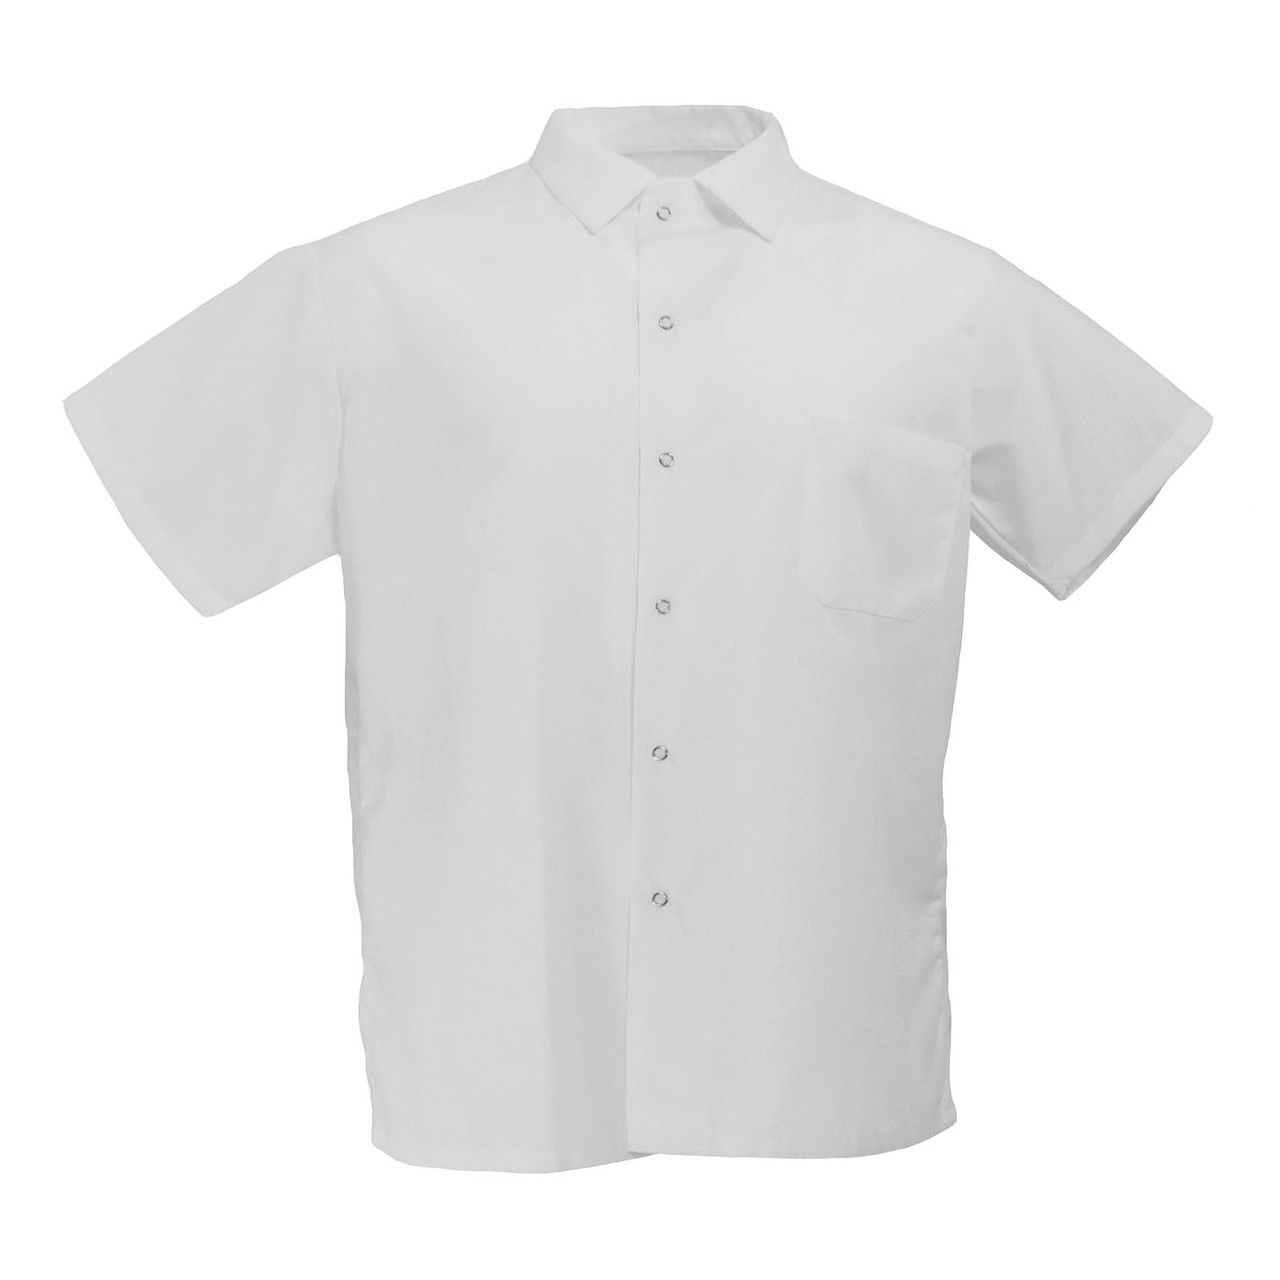 What kind of closures do the Chef Trend S102 chef white shirts have?